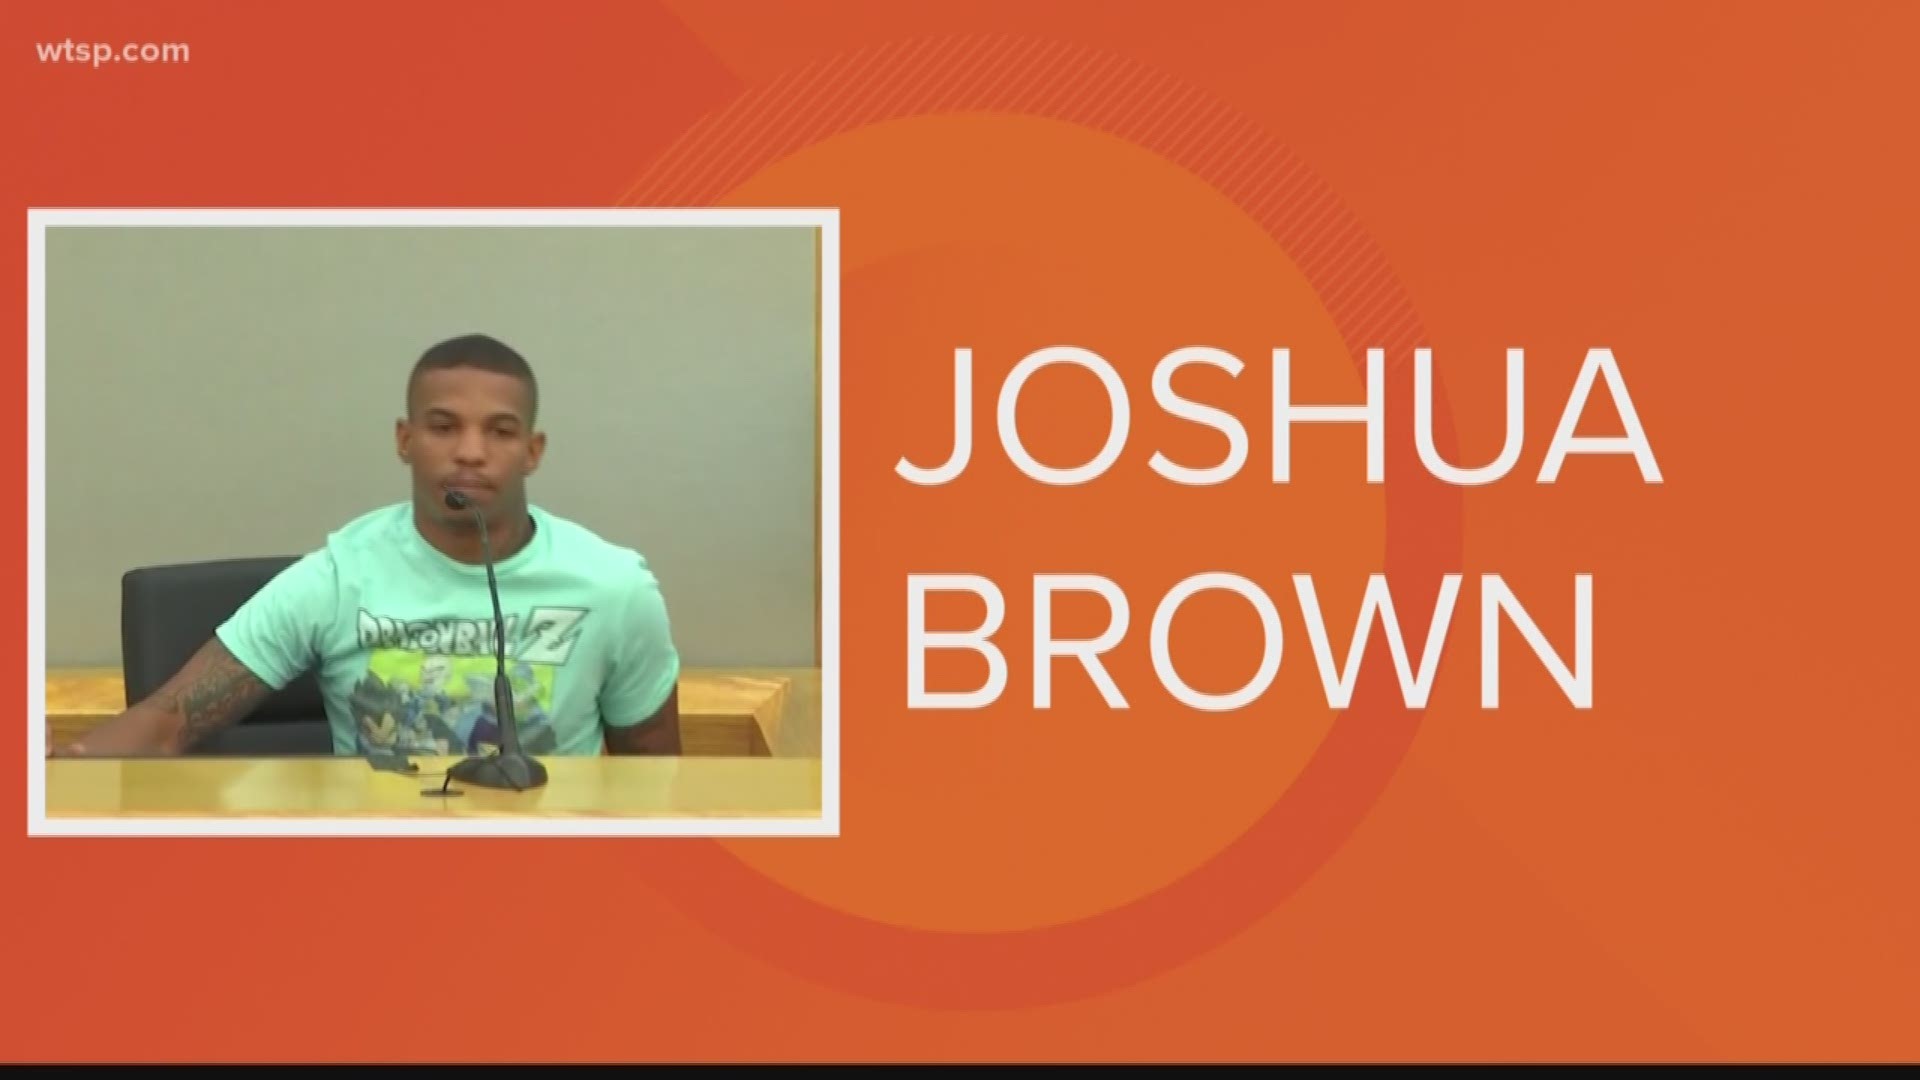 Joshua Brown, 27, was a former neighbor of 26-year-old Botham Jean, the man shot and killed by ex-Dallas police officer Amber Guyger.